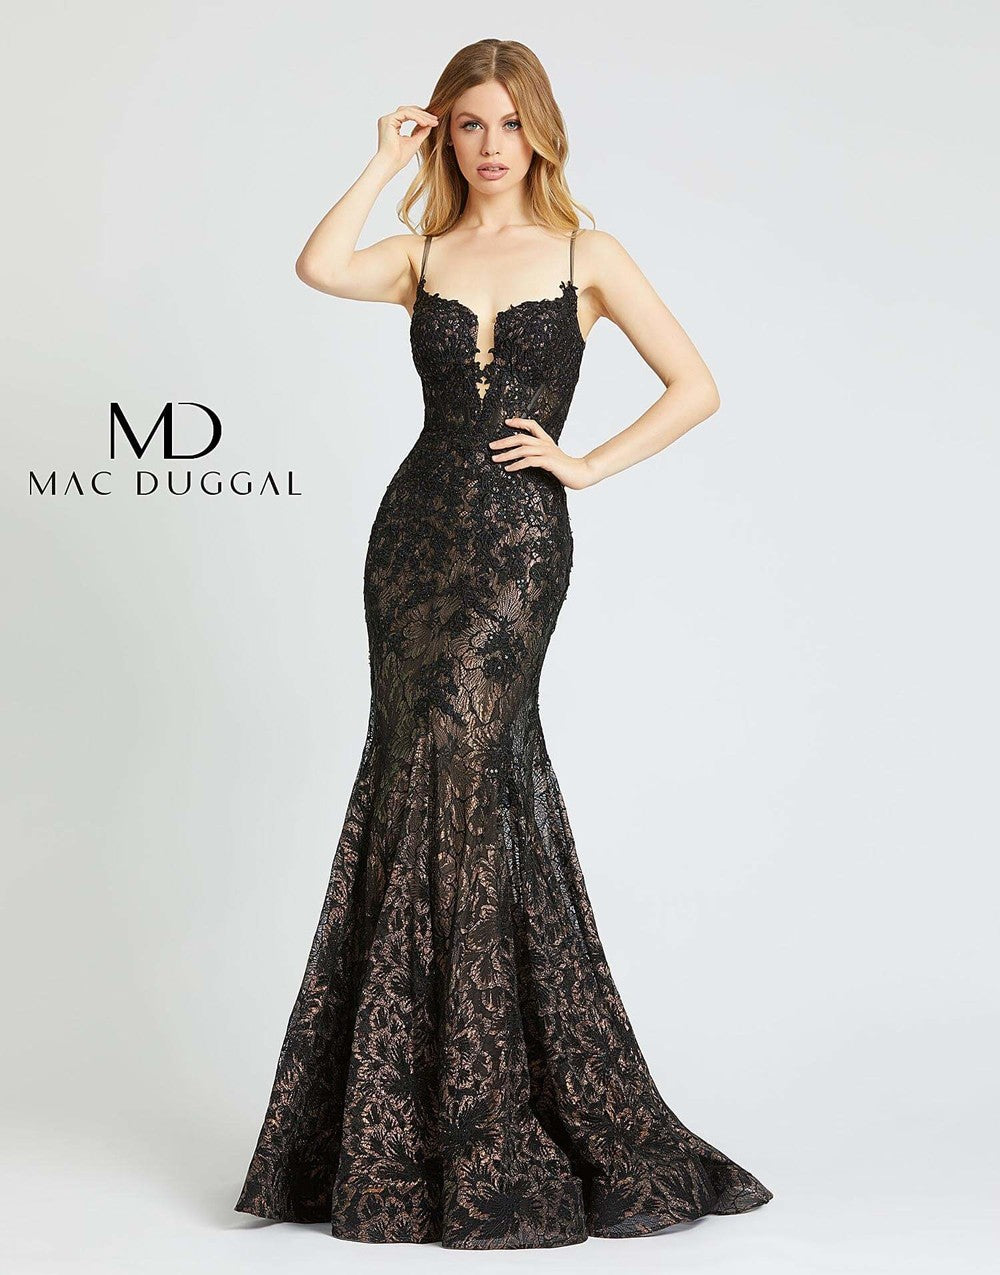 Mac Duggal 79252M - 79252 Have heads turning right when you put on this chic dress! Style 79252M is a mermaid lace gown with spaghetti straps and a v-neckline. This black gown is the perfect combination of sexy & sweet. This Mac Duggal Prom Collection 79252M black prom gown is styled in metallic lace, featuring a corset bodice with a deep-notched neckline and spaghetti straps. This semi-trumpet dress is completed with soft godets that spill to a horsehair hem and court train. Prom, Pageant, Sexy. Plunging n